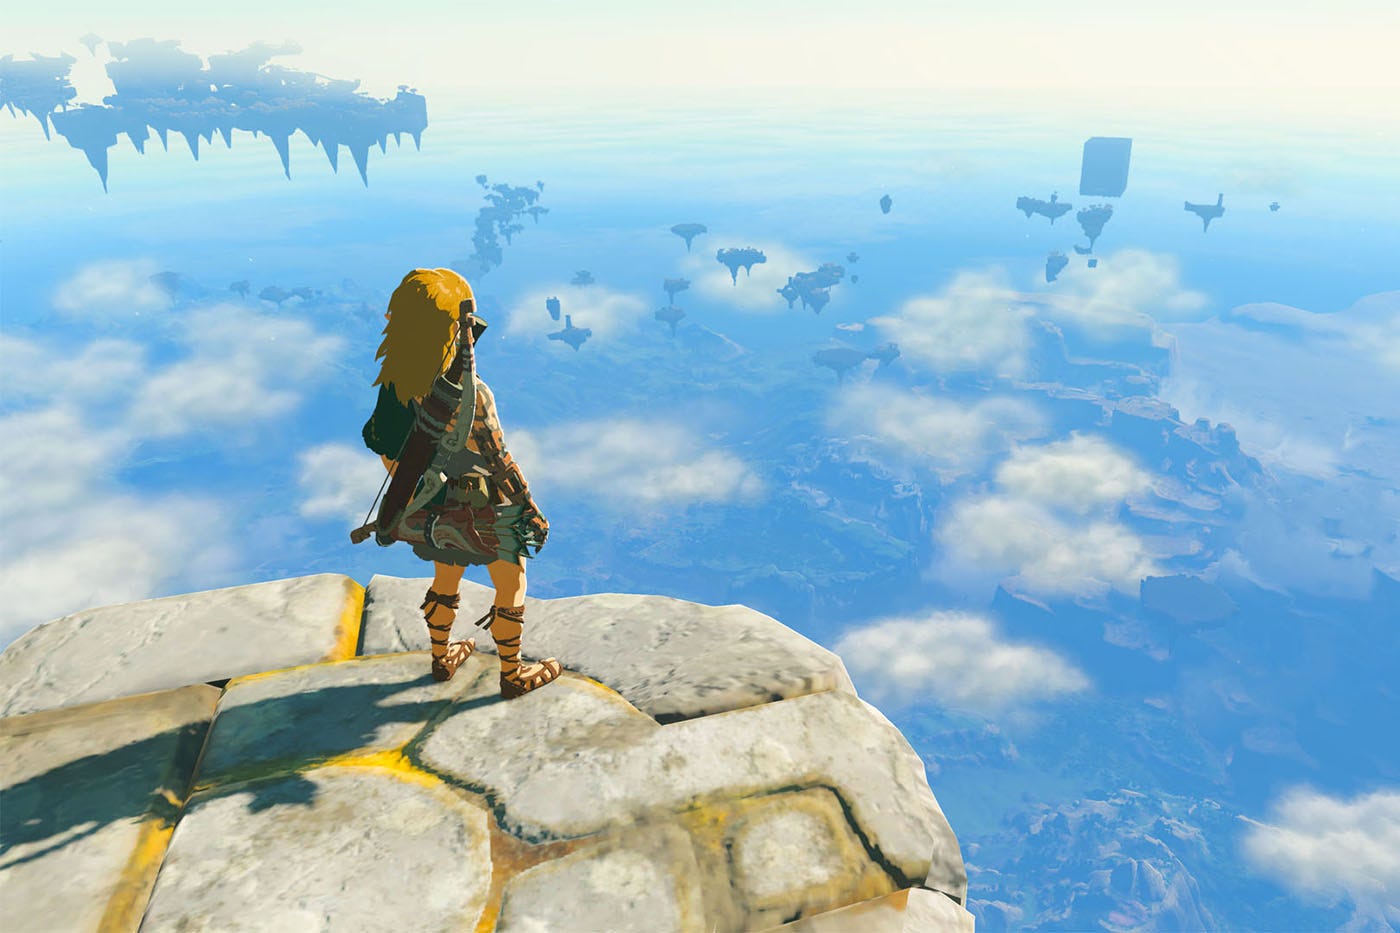 Why Zelda's "Tears of the Kingdom" is So Anticipated